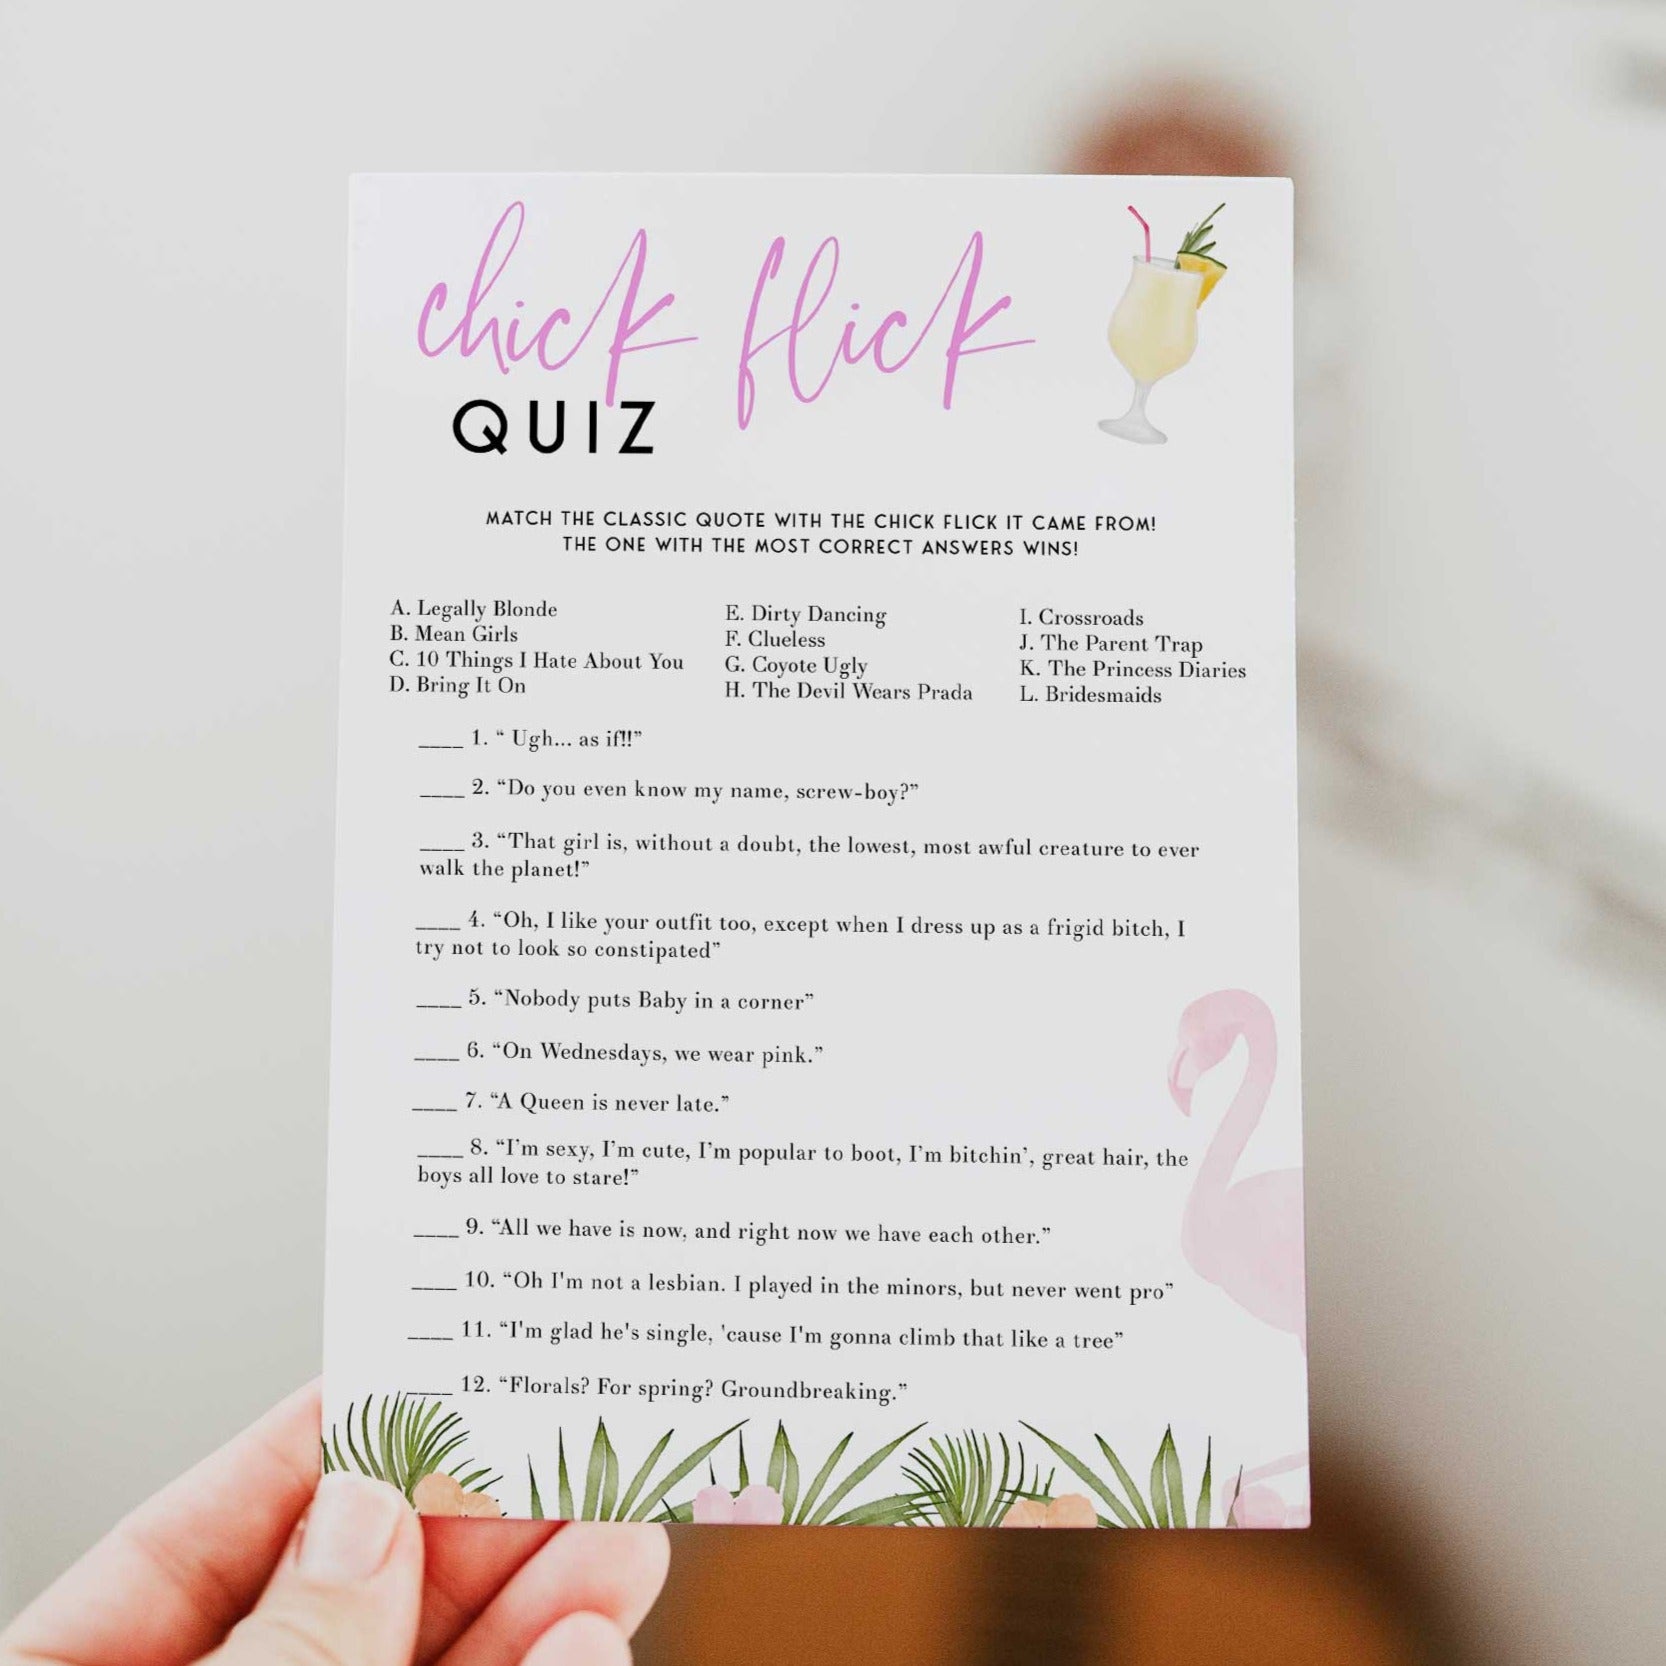 Fully editable and printable chick flick quiz game with a miami design. Perfect for a miami, Bachelorette themed party